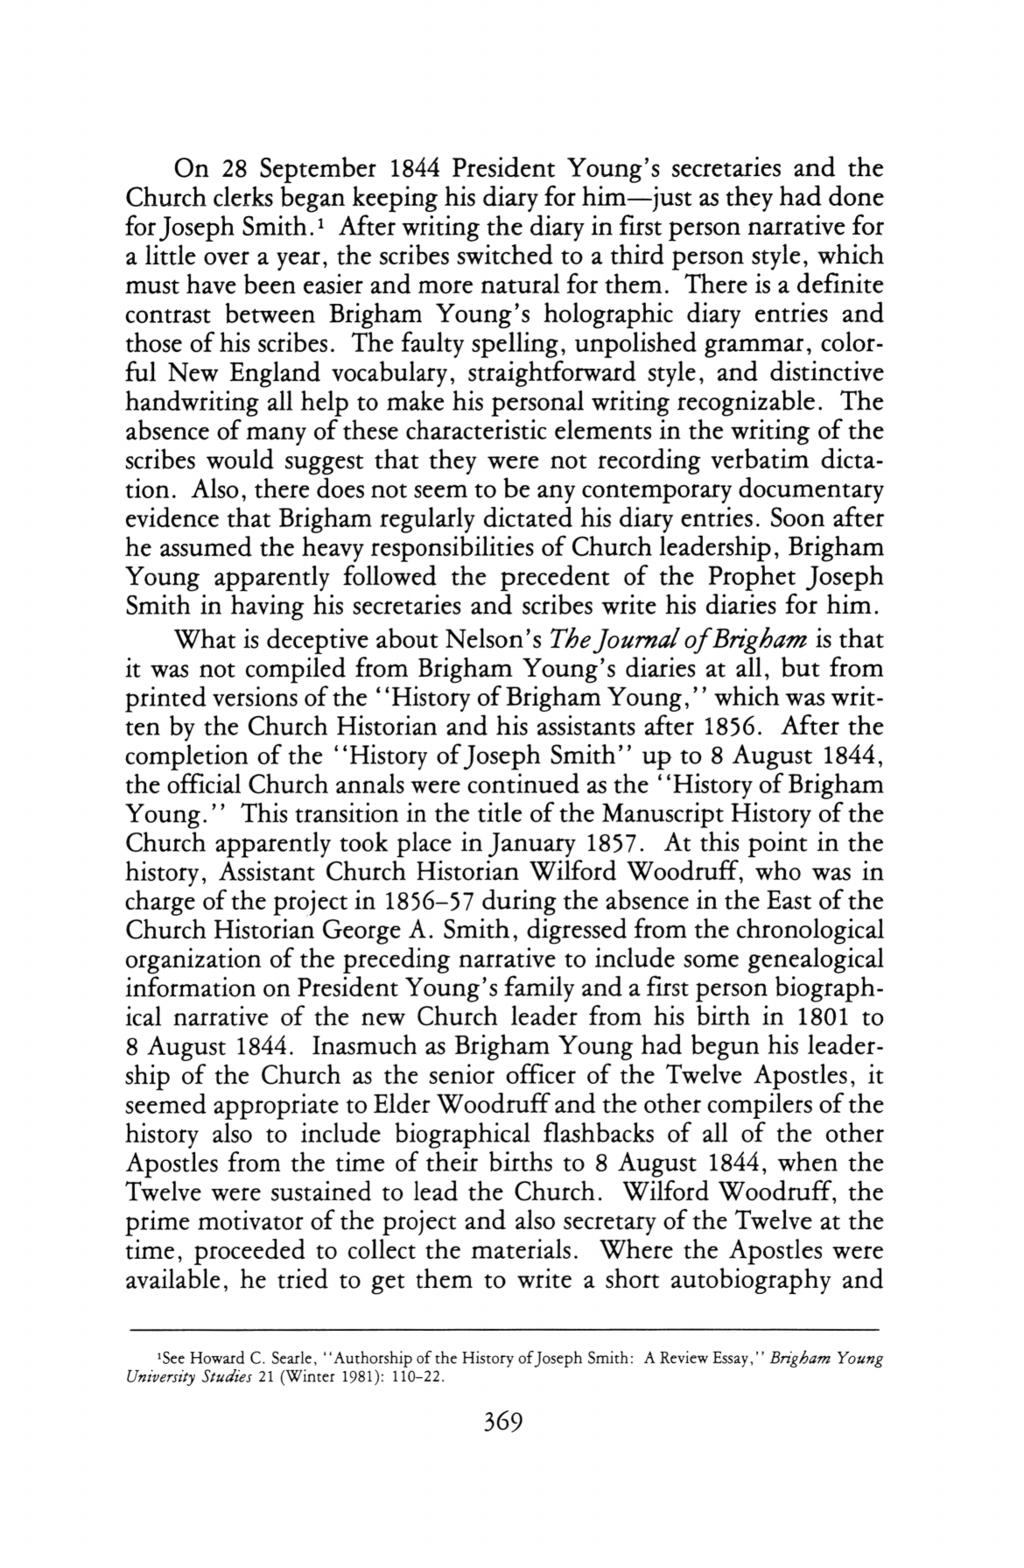 Searle: Authorship of the History of Brigham Young: A Review Essay on 28 september 1844 president youngs secretaries and the church clerks began keeping his diary for him just as they had done for